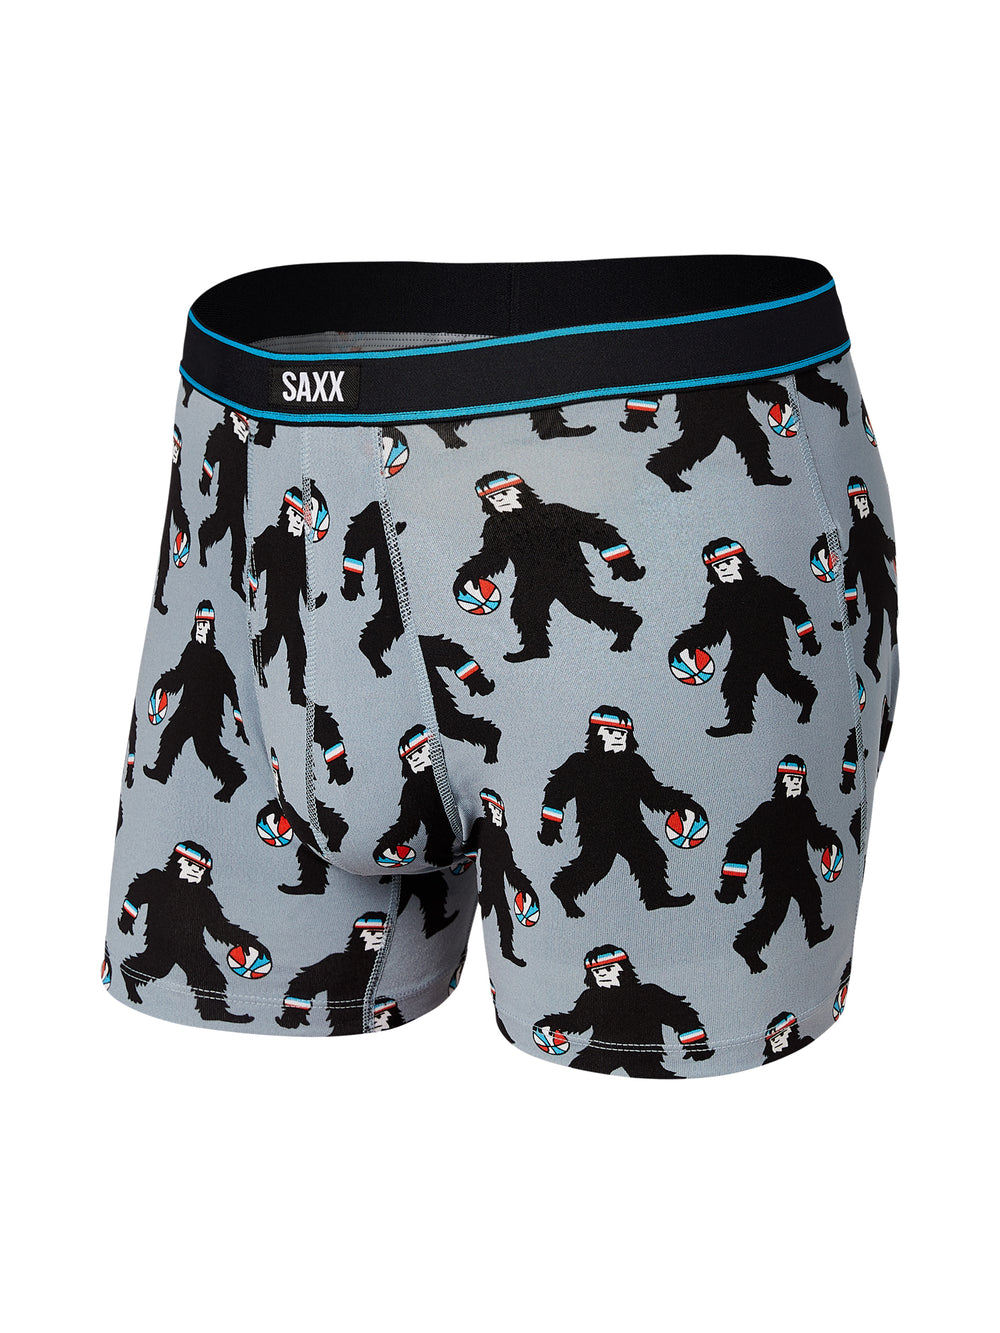 SAXX DAYTRIPPER BOXER BRIEFING - HARRY & HOOPS - DÉSTOCKAGE